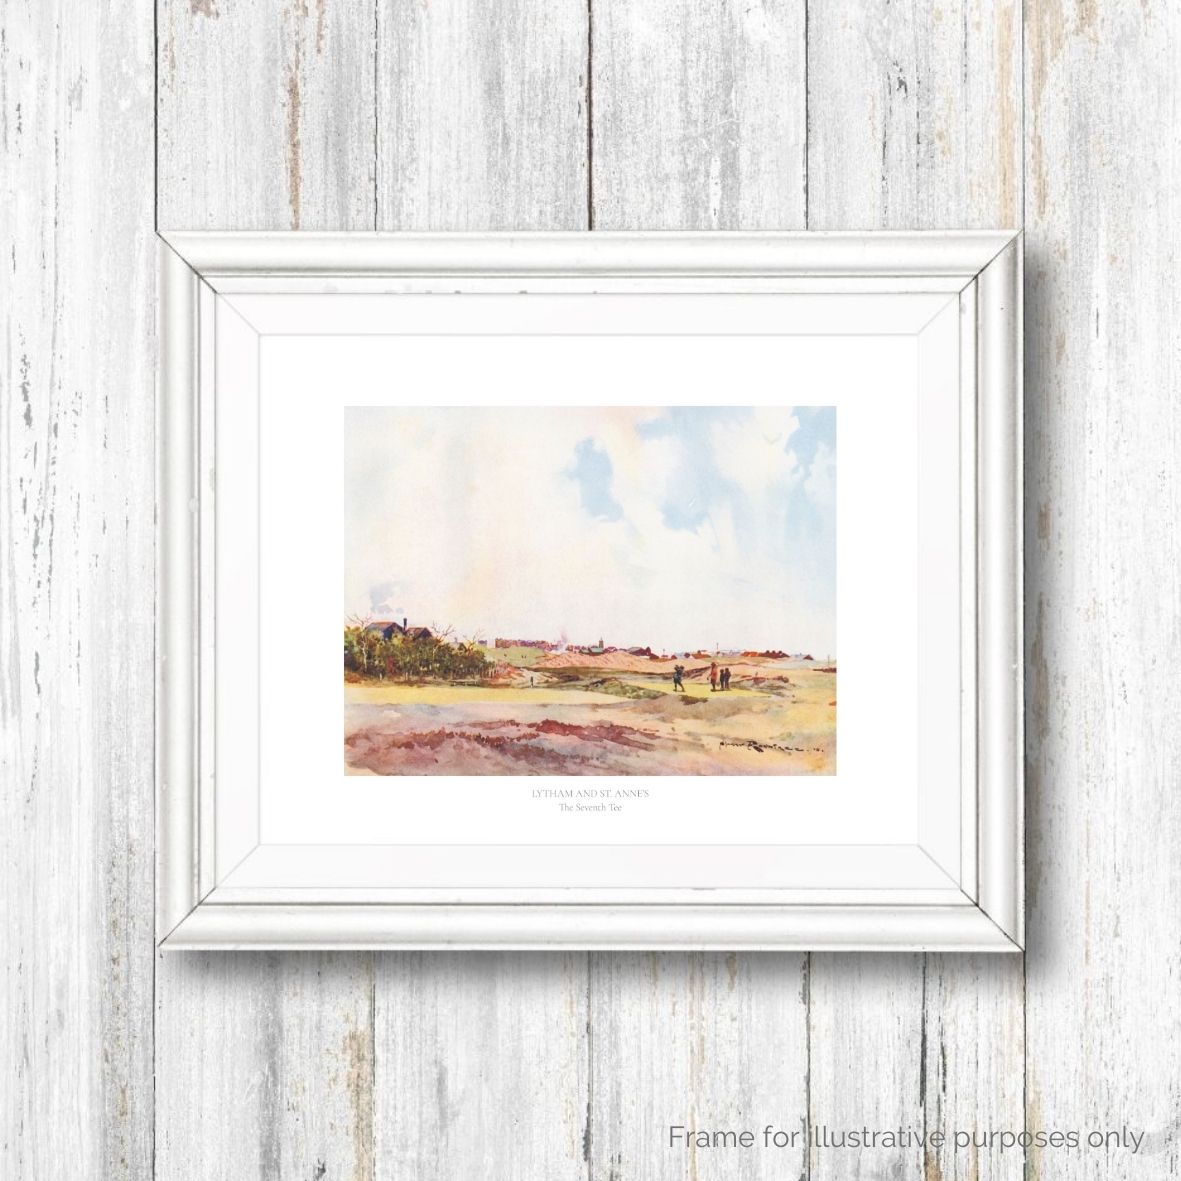 Royal Lytham St Annes Golf Club framed print with text by Harry Rountree